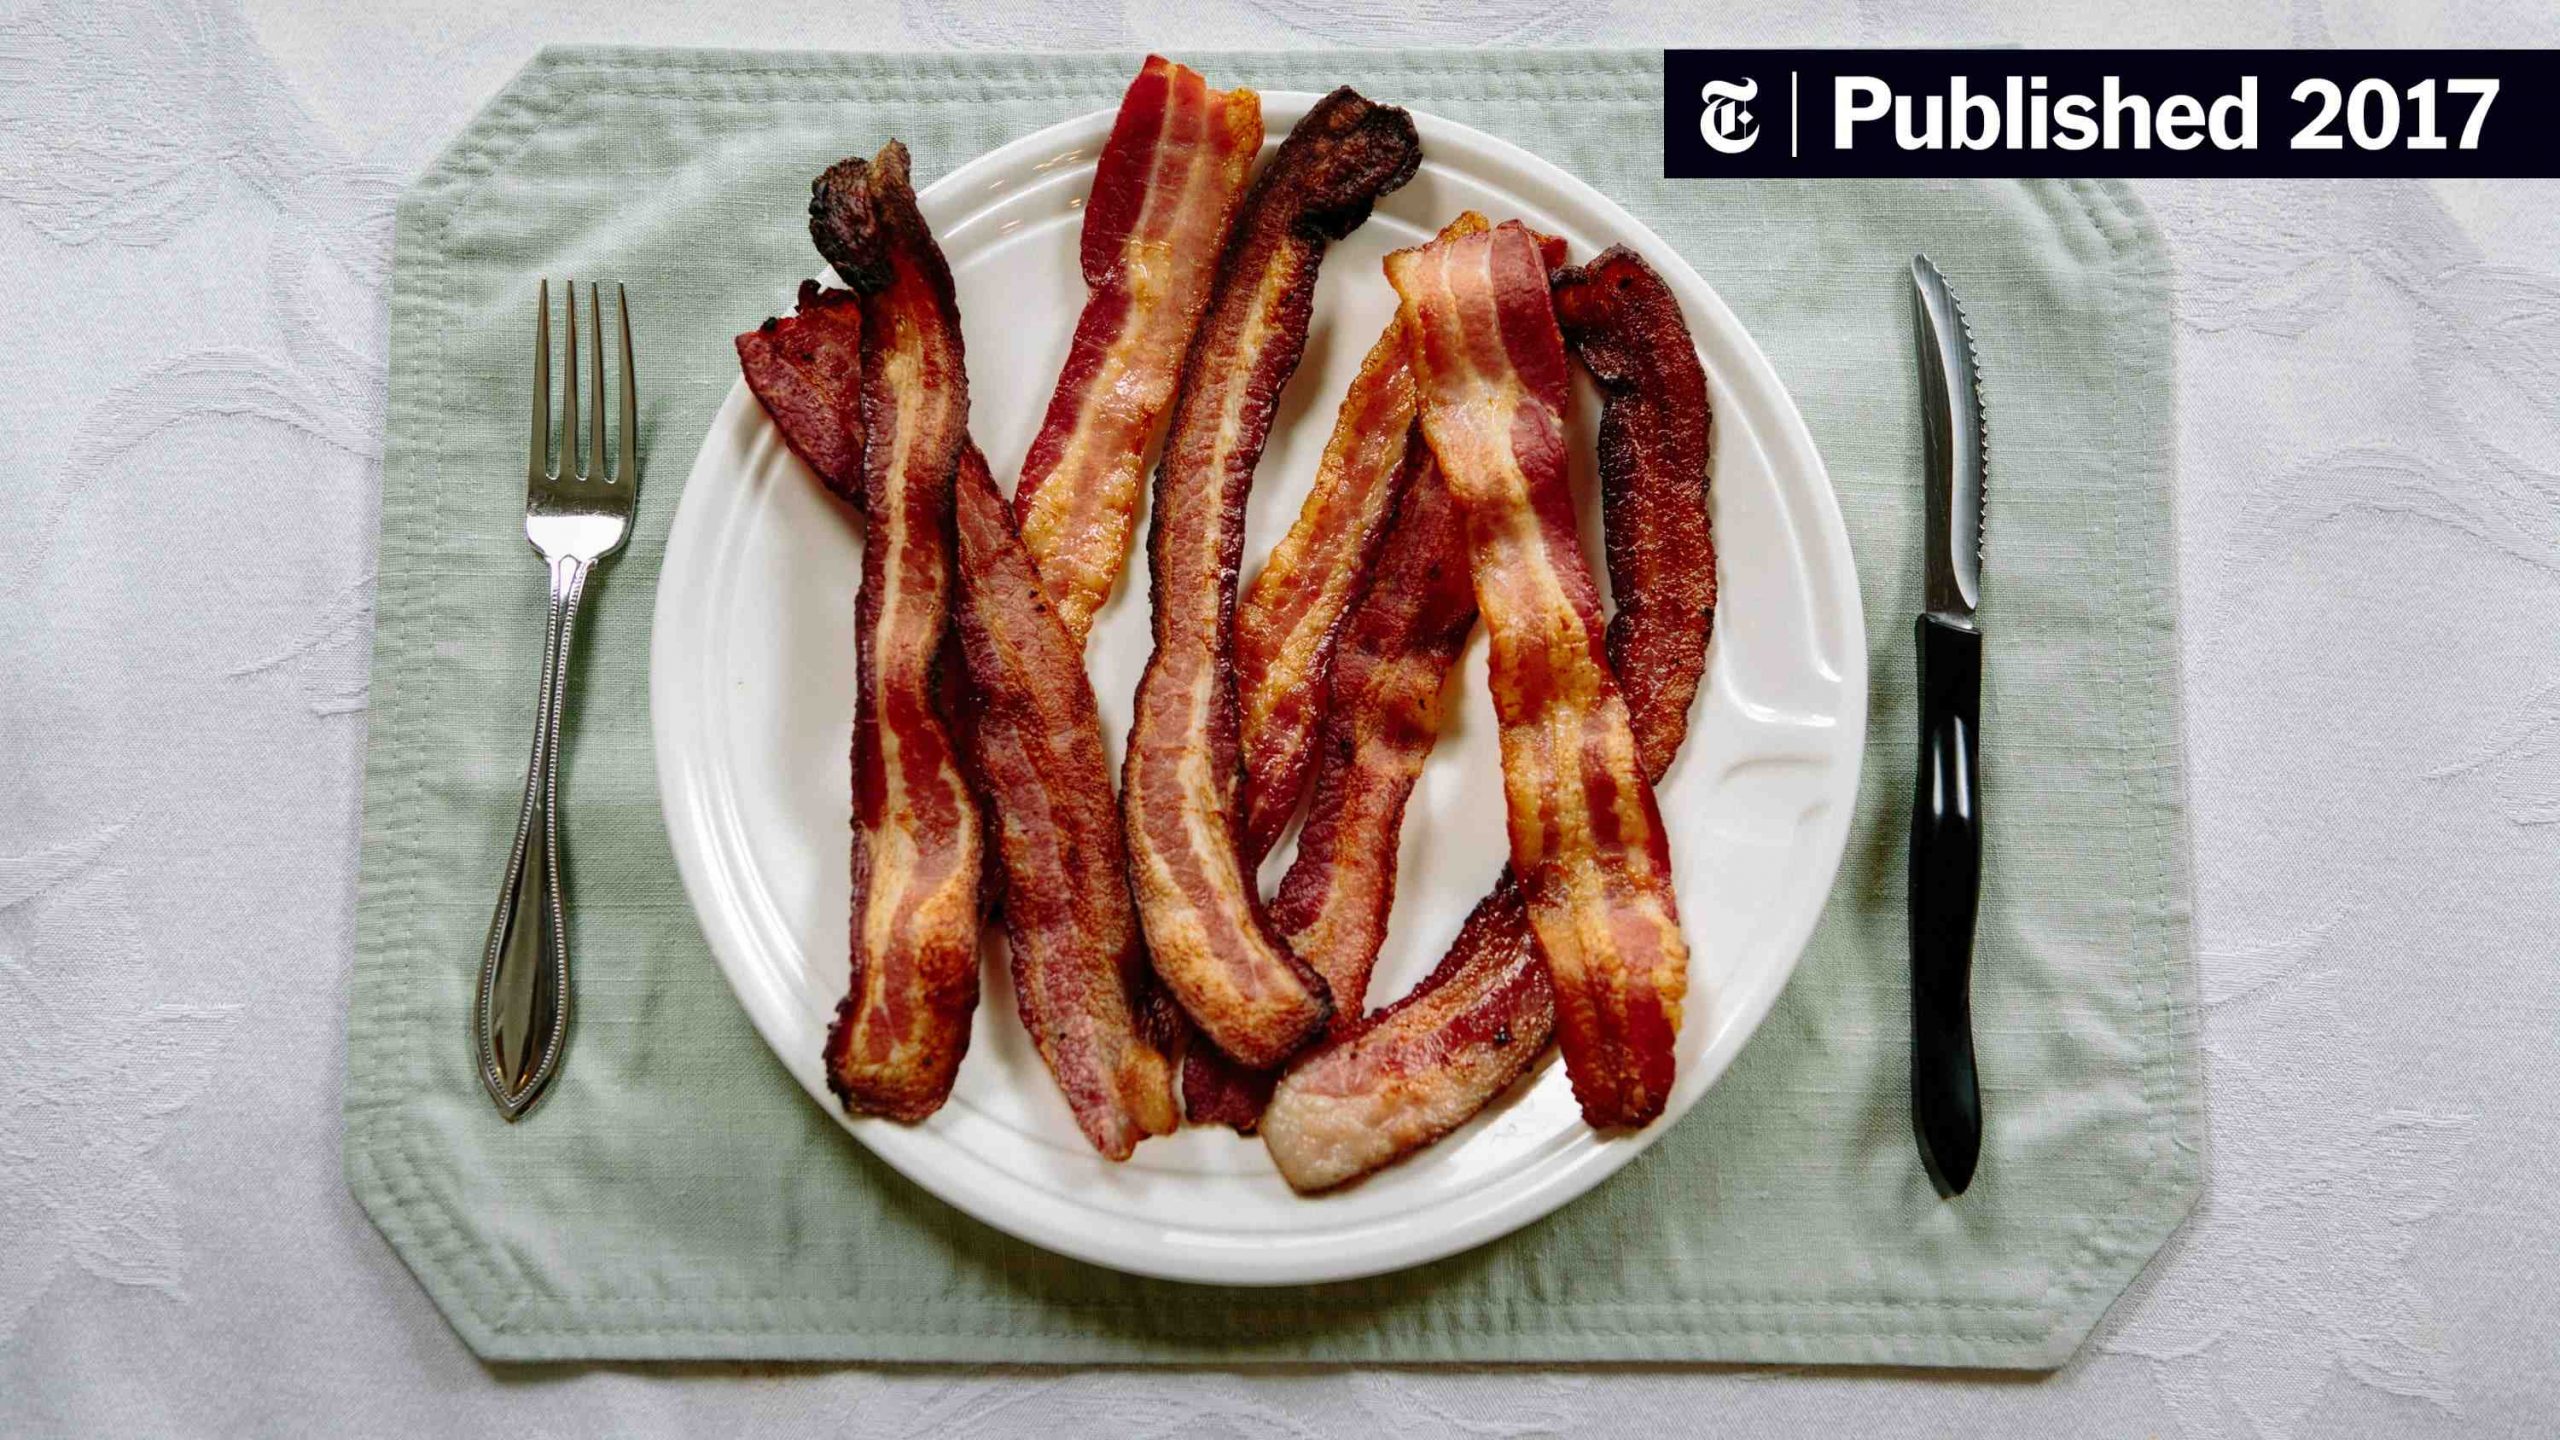 When was bacon invented in America?